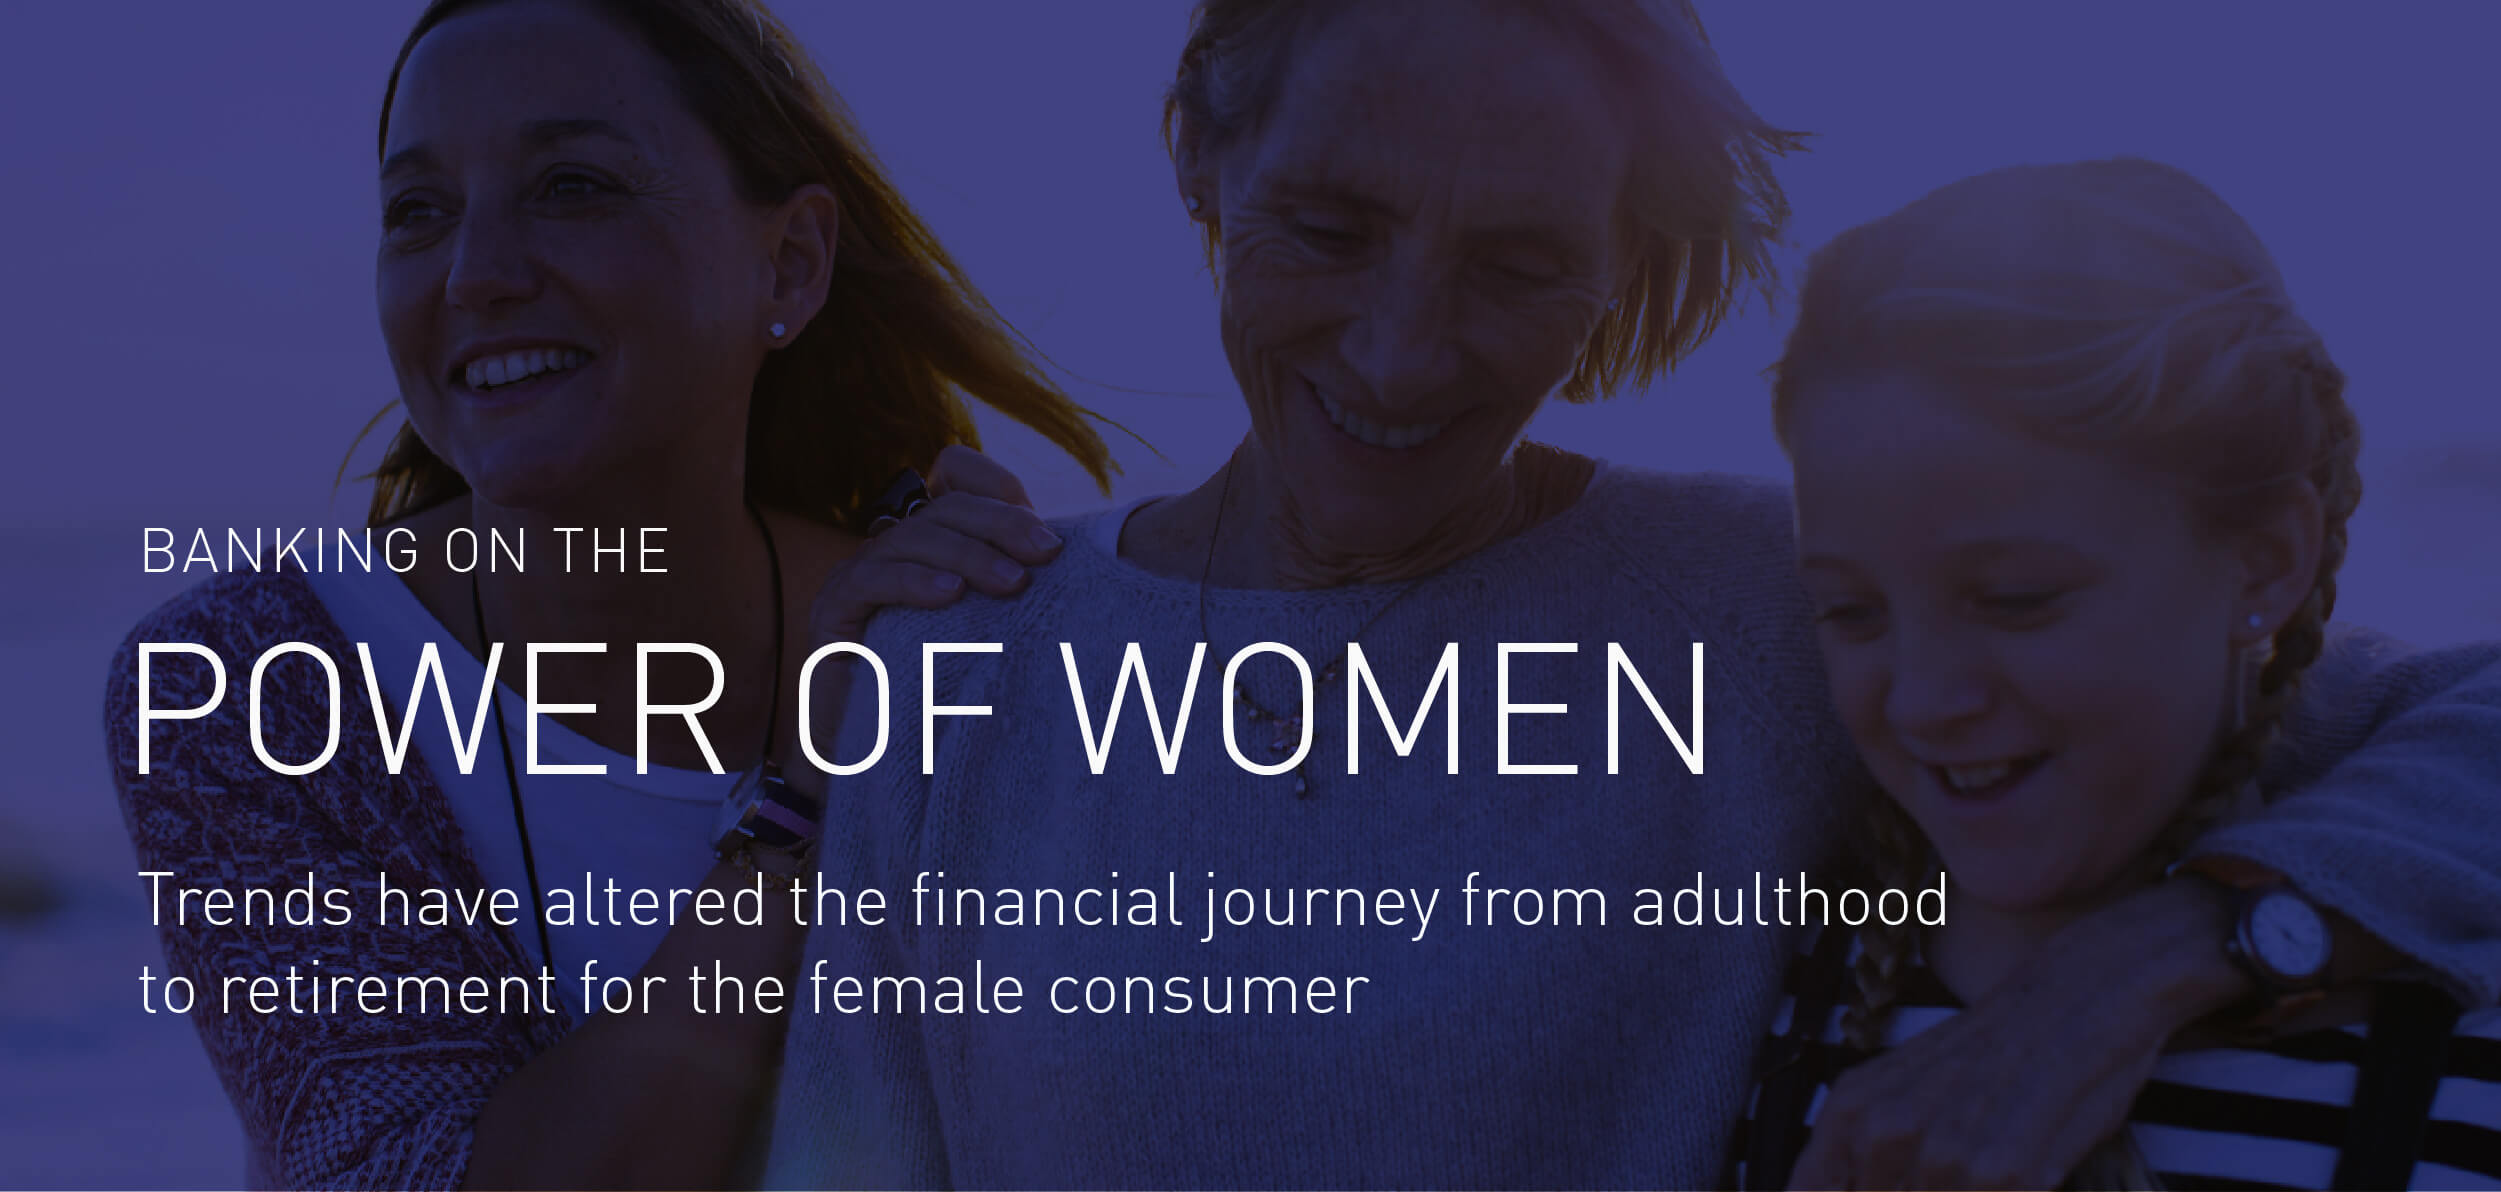 Banking on the Power of Women - Citi Ventures